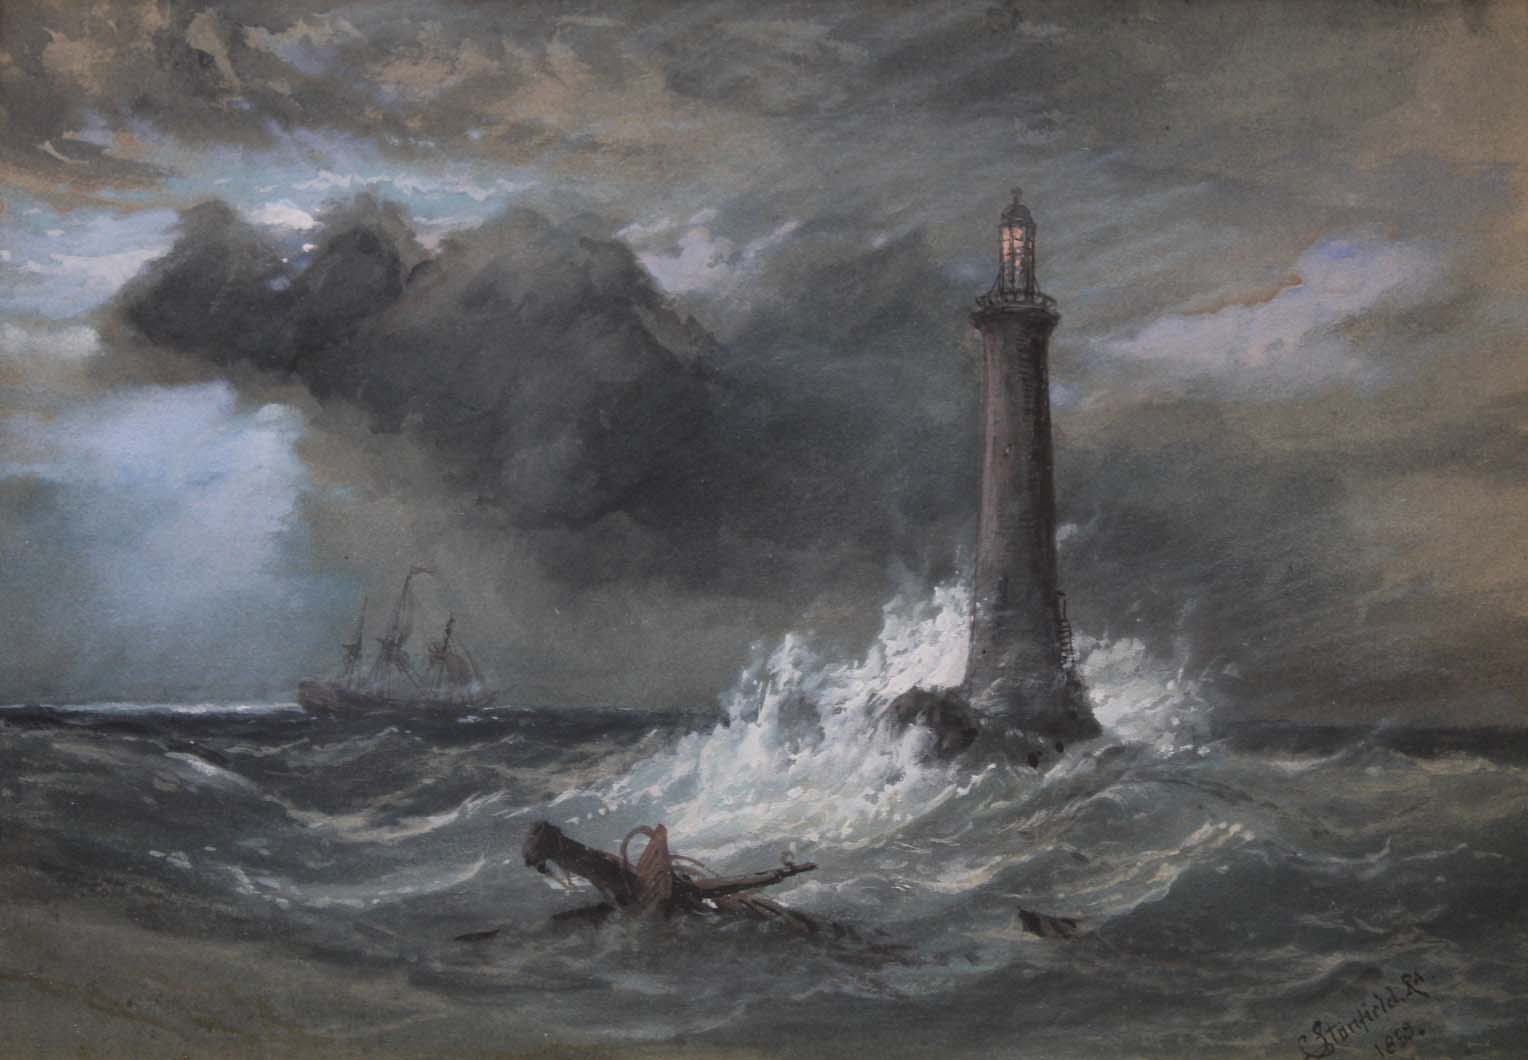 CLARKSON STANFIELD, RA (1793-1867) EDDYSTONE LIGHTHOUSE Signed and dated 1855, bears inscribed label